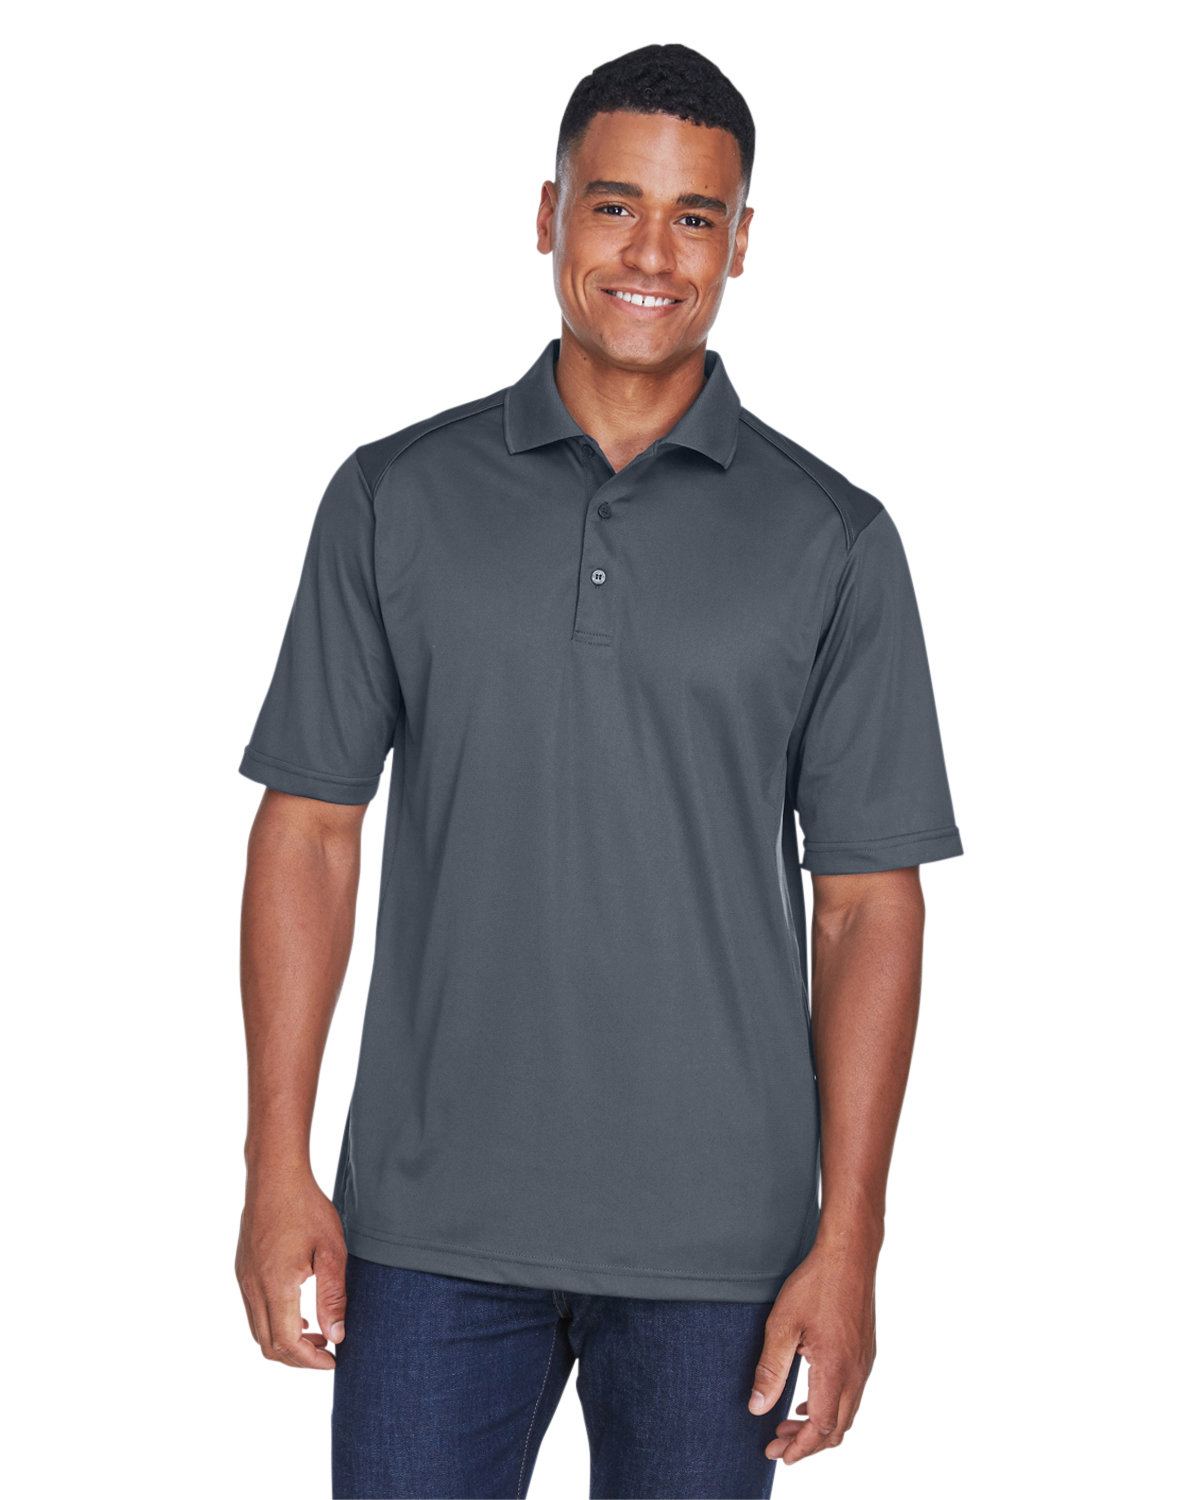 Extreme Men's Eperformance™ Shield Snag Protection Short-Sleeve Polo CARBON 